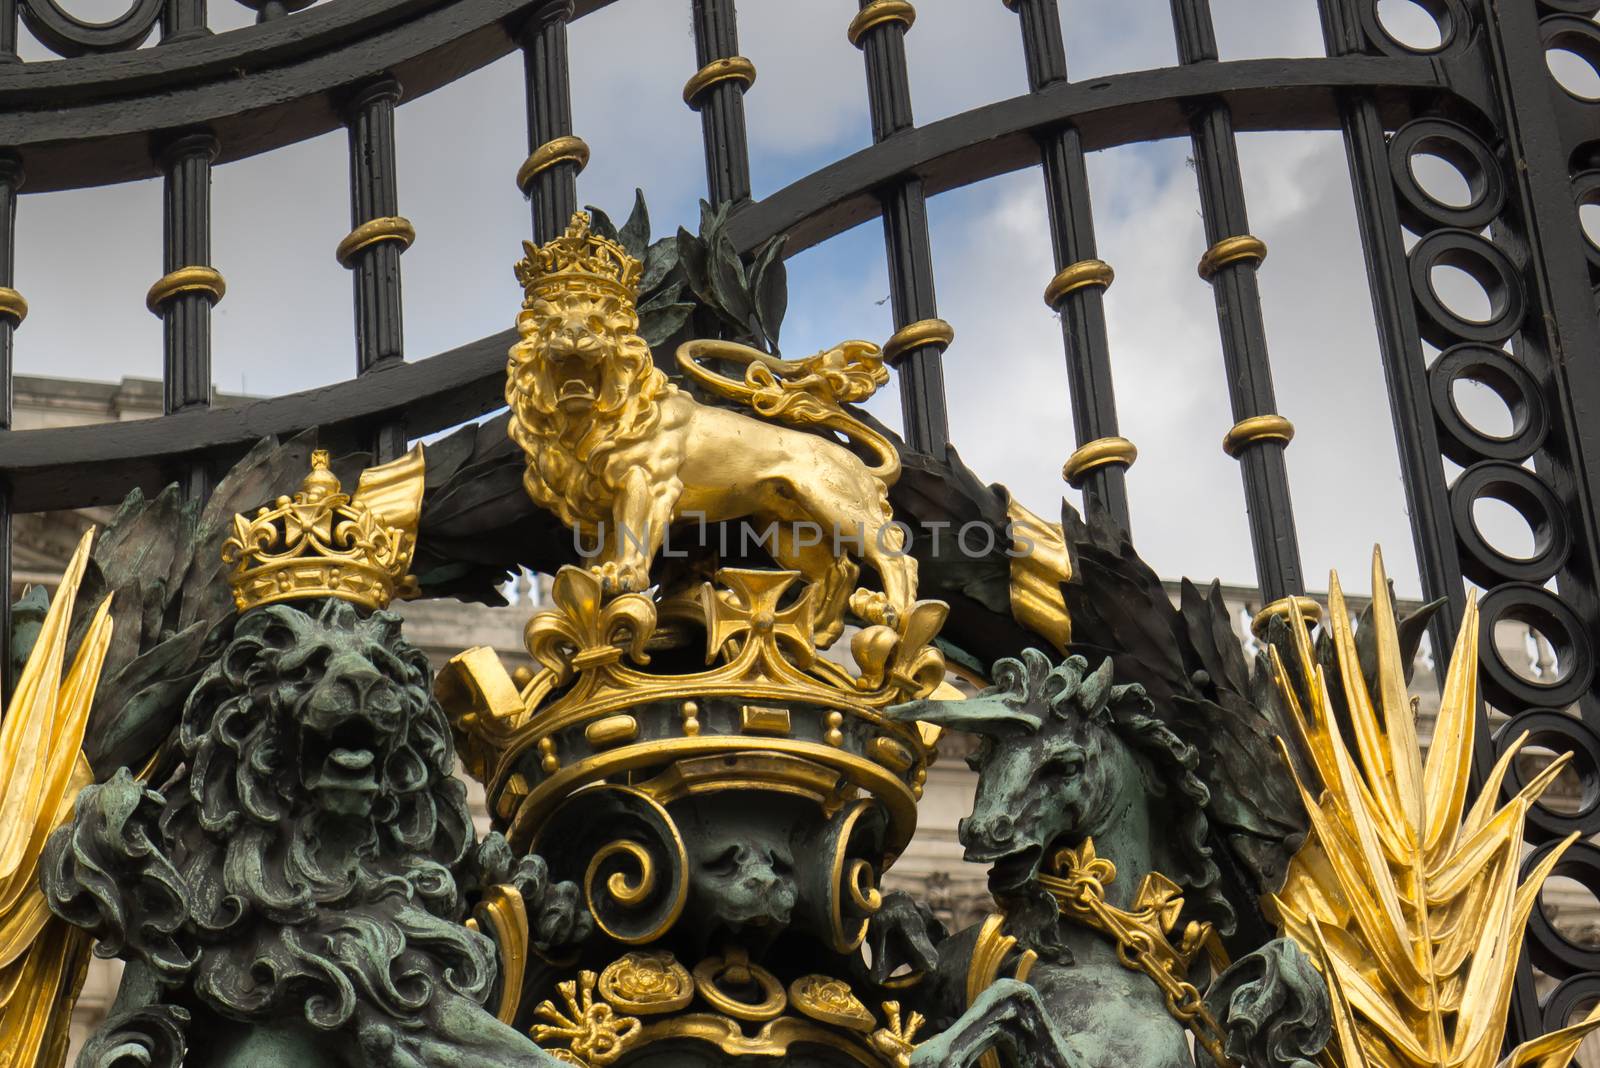 Very close up to the Buckingham Palace Gates by chrisukphoto